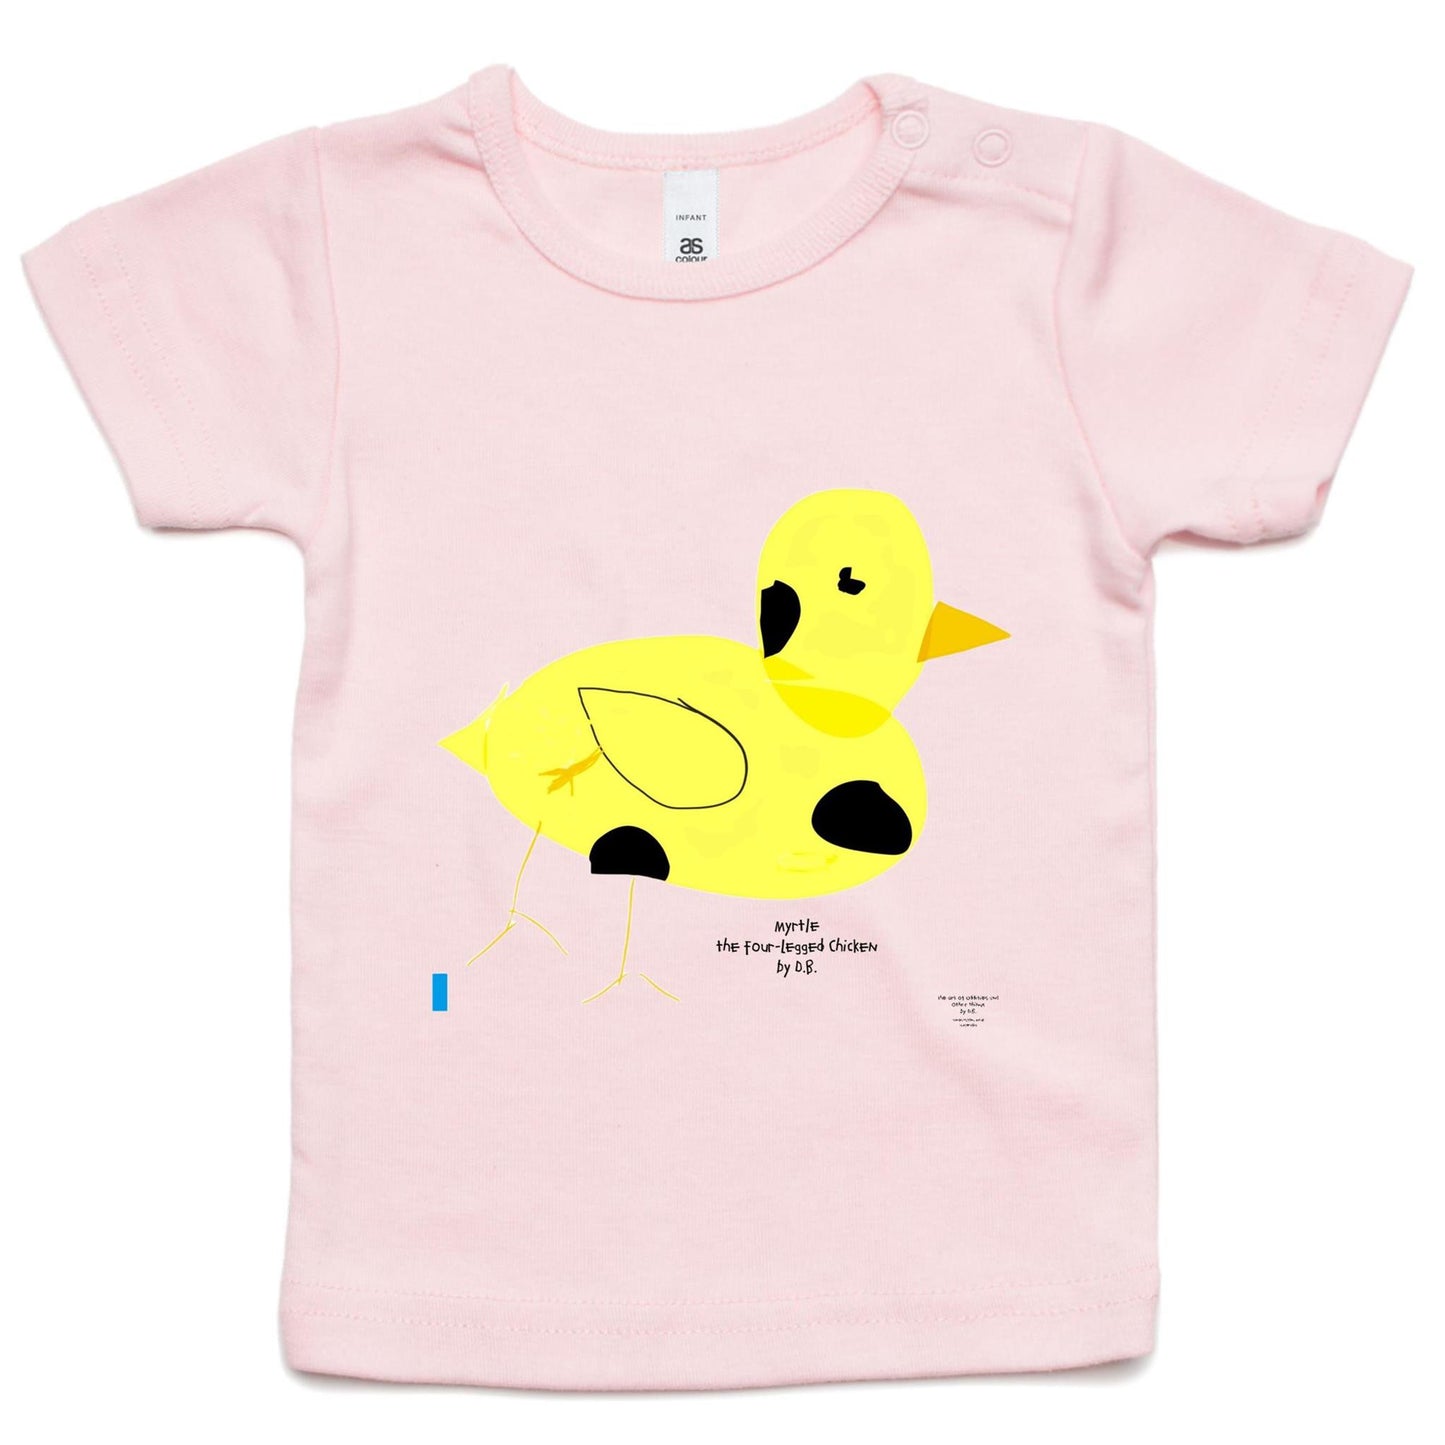 Infant Wee Tee with Myrtle the Four-Legged Chicken print by D.B.